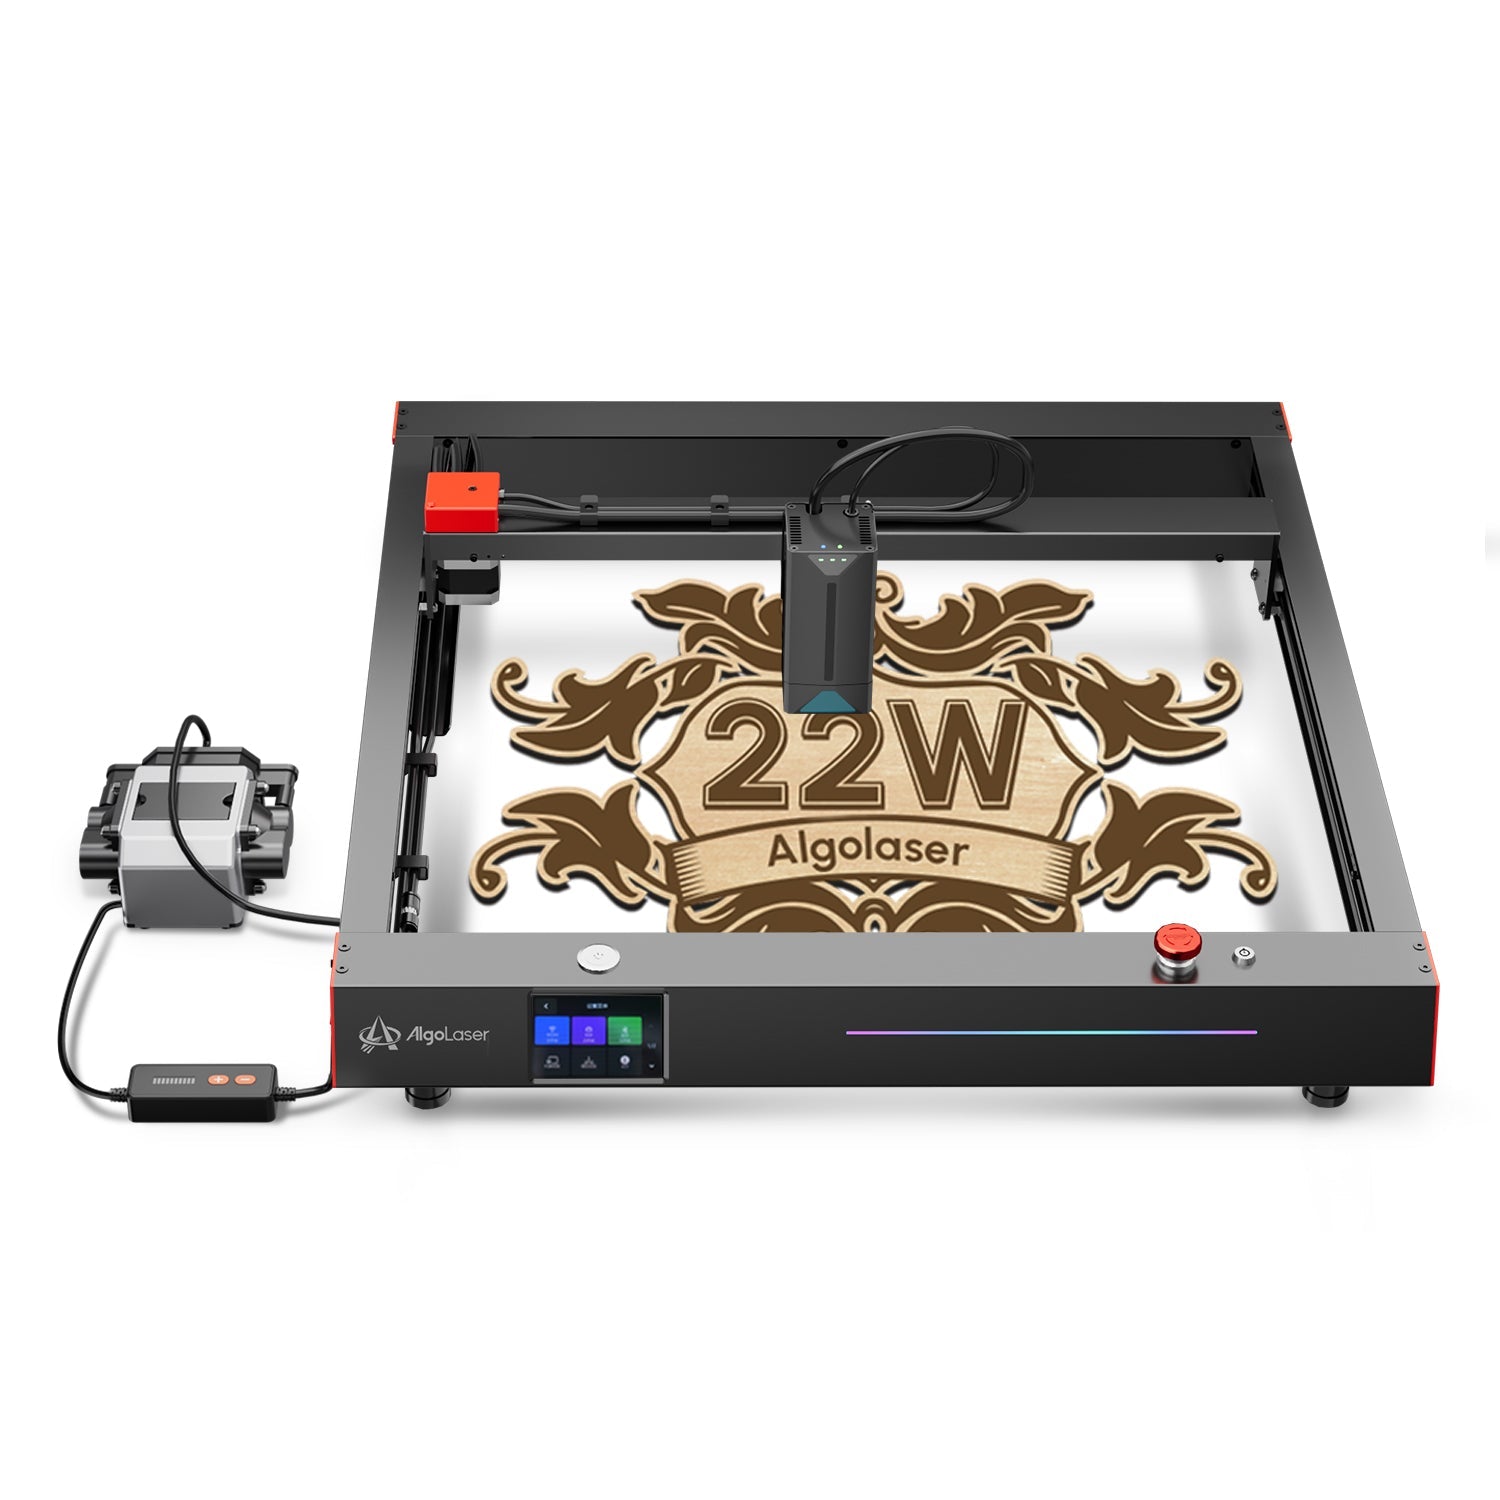 AlgoLaser Delta 22W Laser Engraver top view with cut and engraved item- Stelis3D